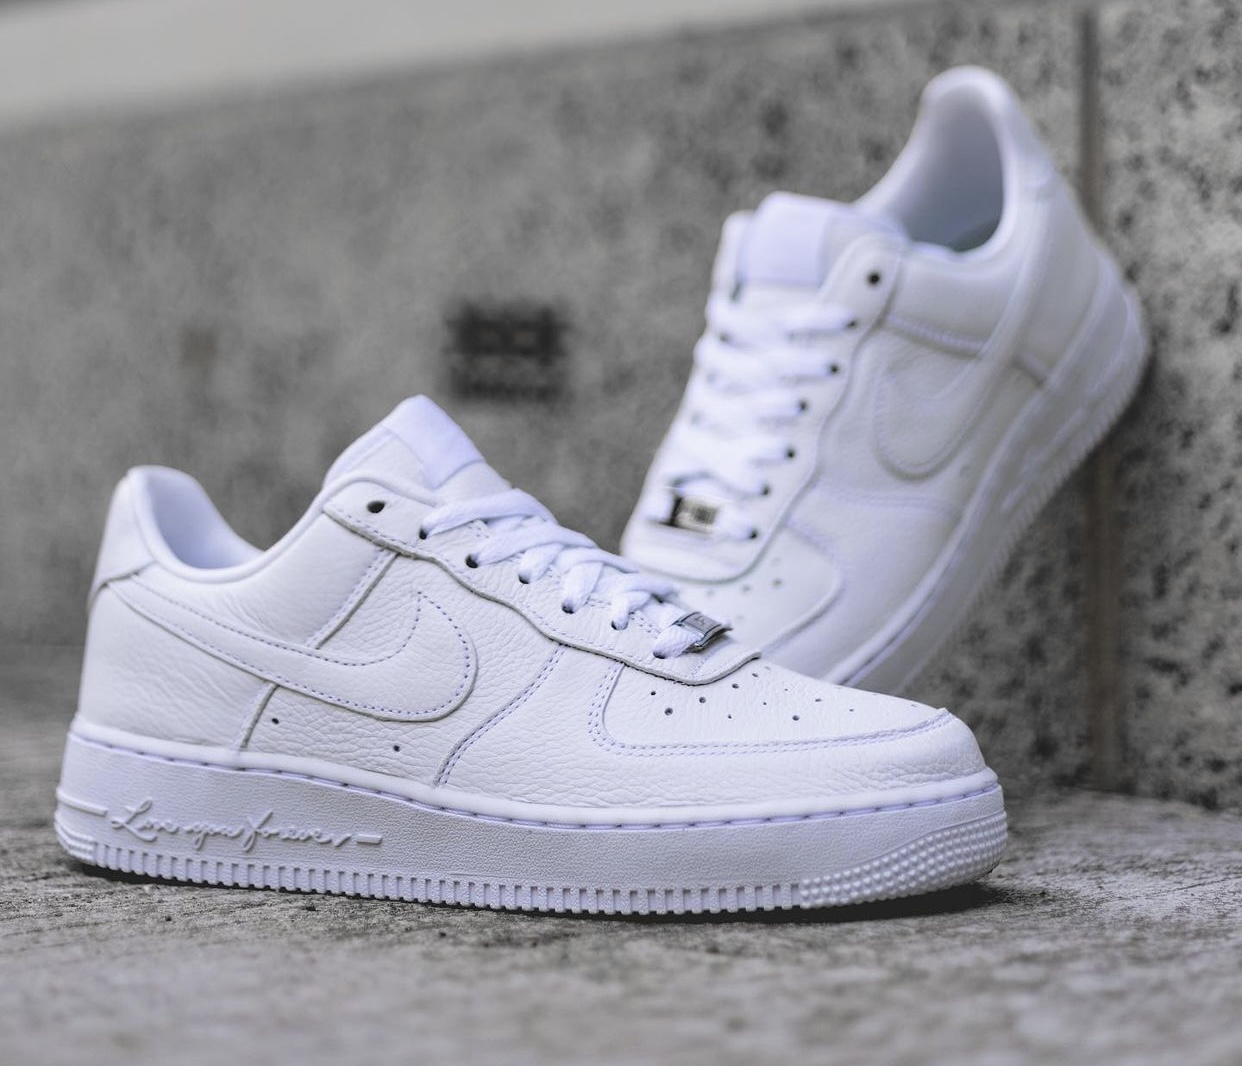 Drake NOCTA Nike Air Force 1 Certified Lover Boy CZ8065-100 Release Date